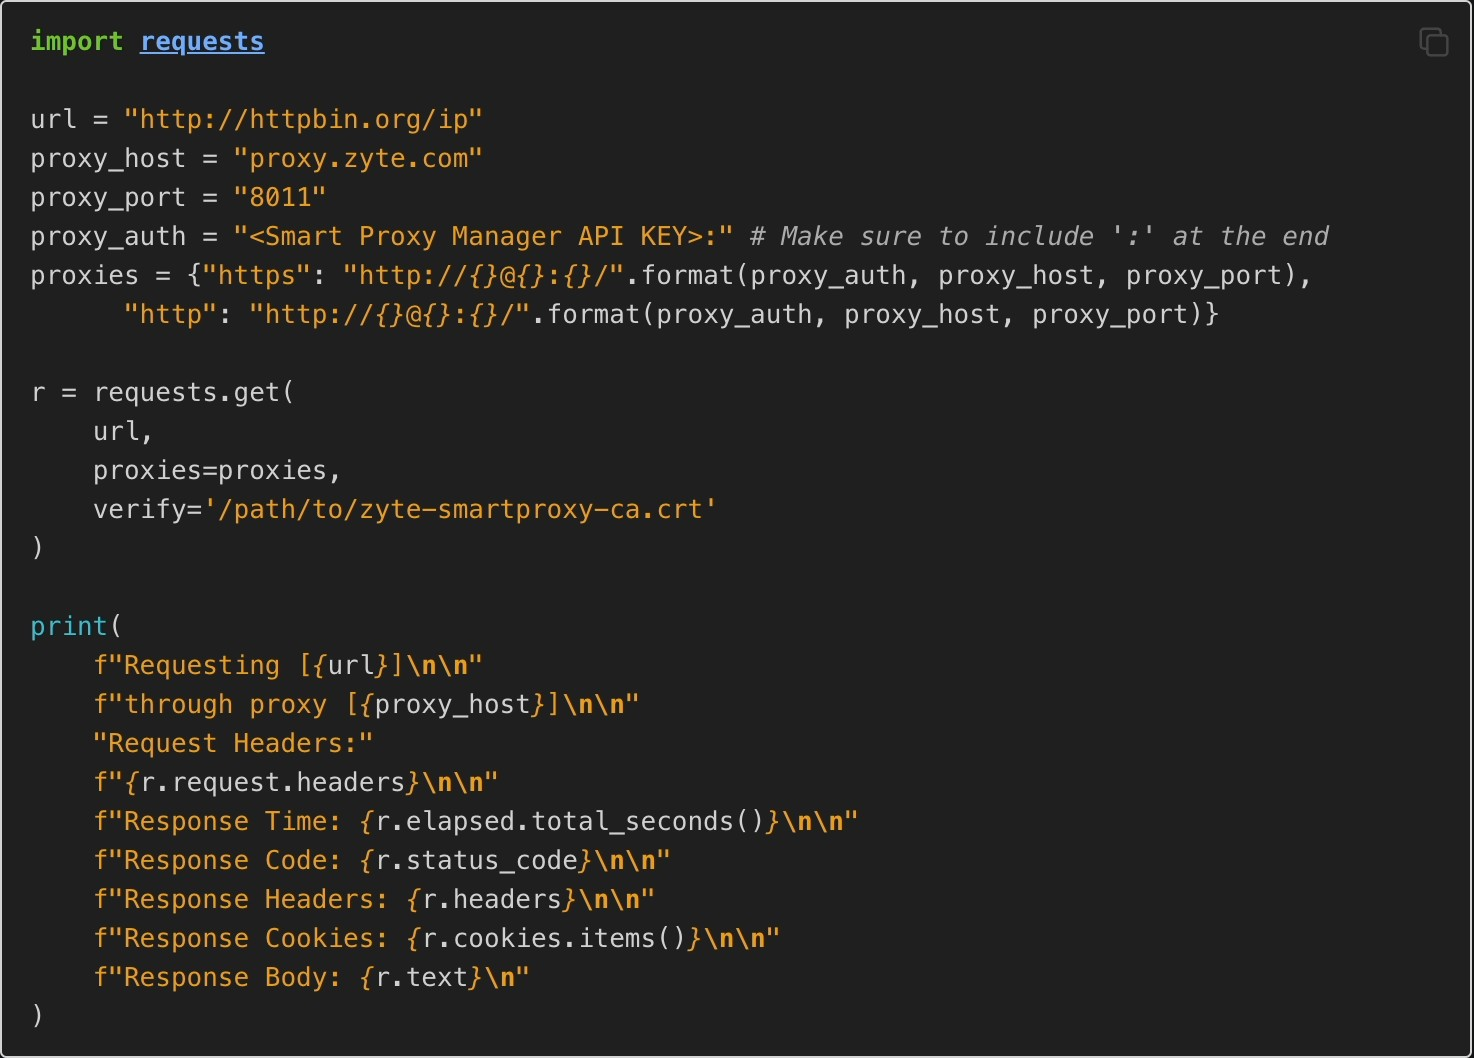 The image shows how to use Smart Proxy Manager with Python requests.